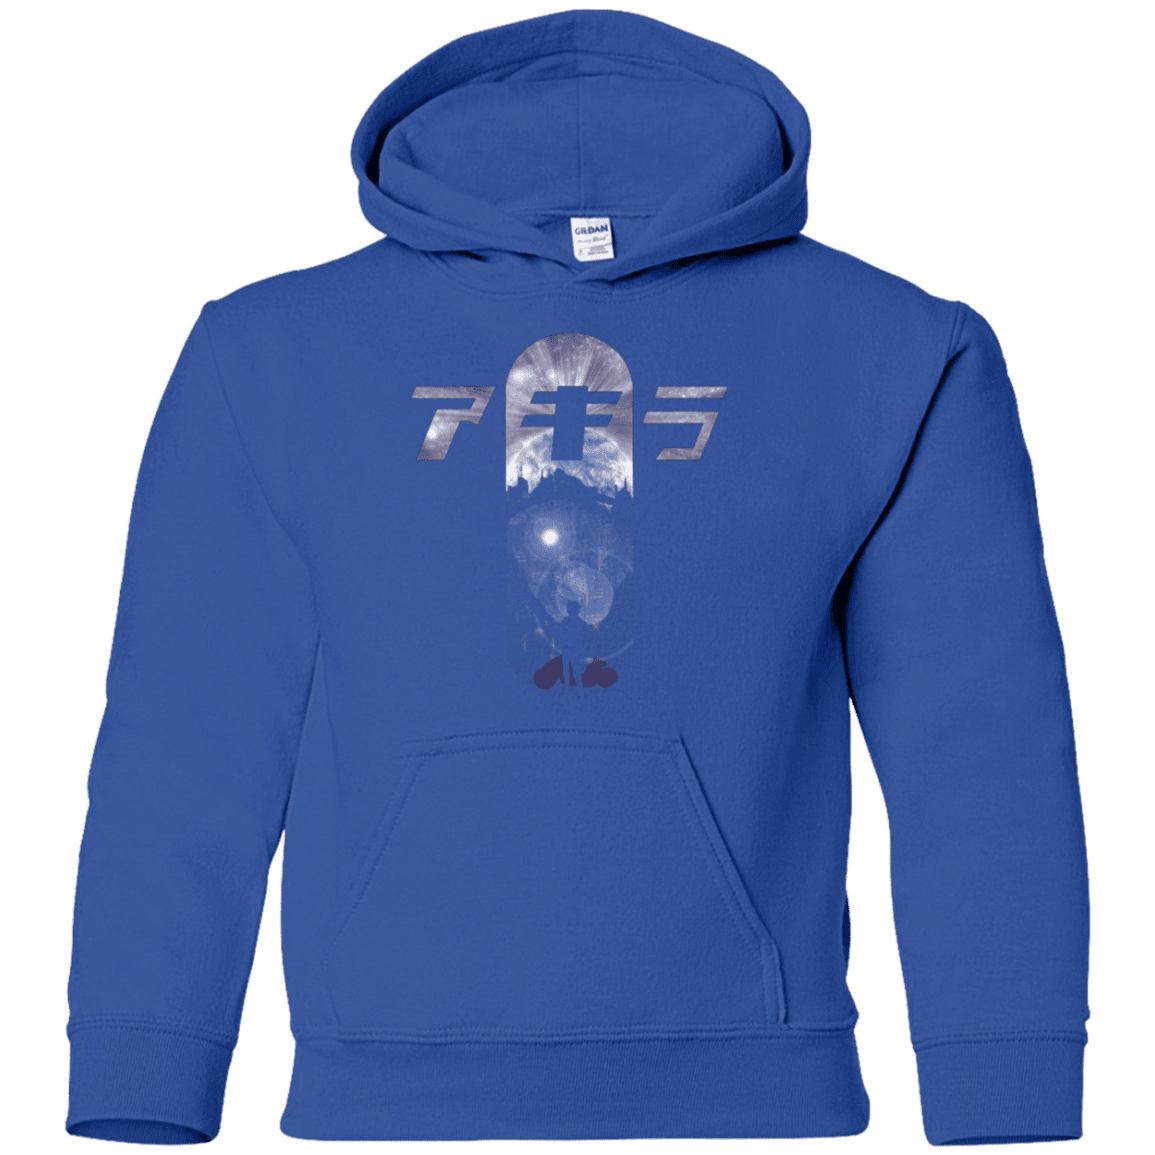 Sweatshirts Royal / YS About to Explode Youth Hoodie